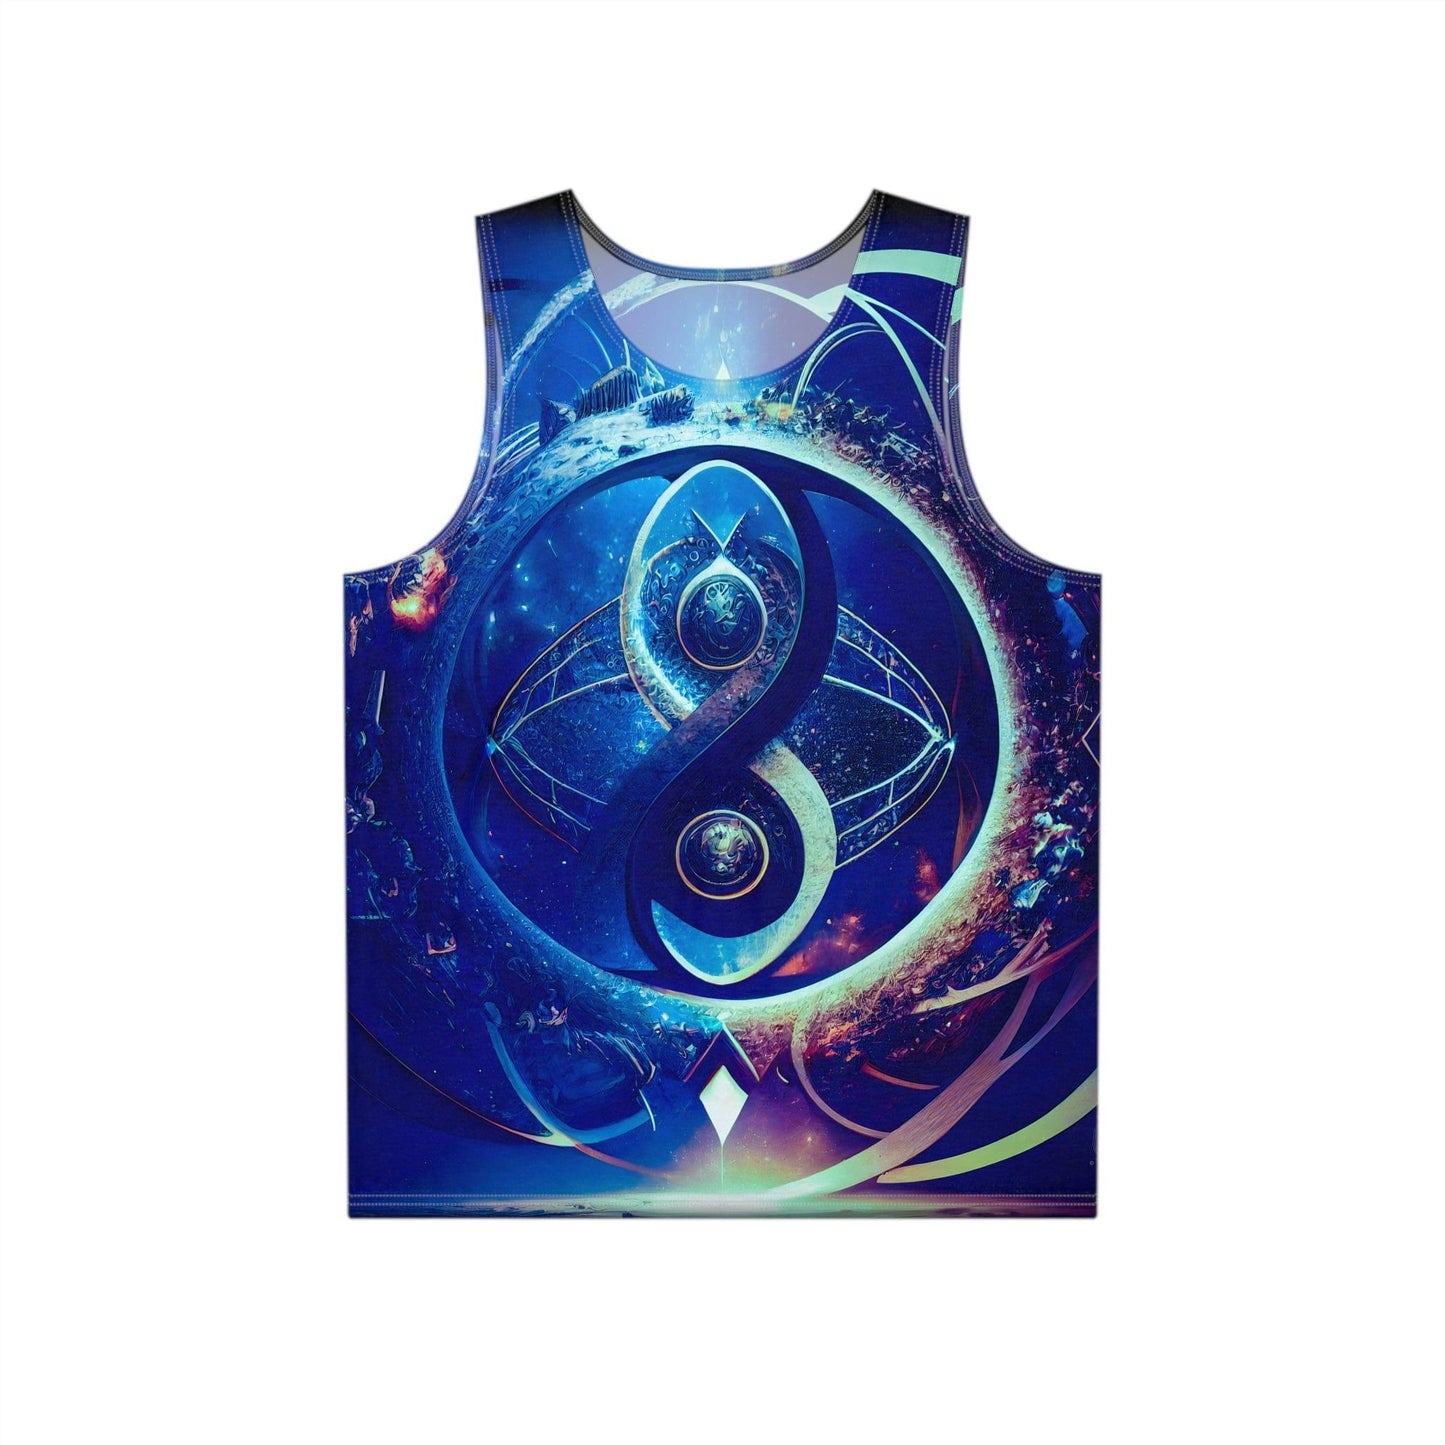 Sacred Geometry Infinity Blue Tank Top Shirt Custom Sublimation Print All-Over Design Tank Top - Stylish Comfort for Gym and Streetwear - Alchemystics.org